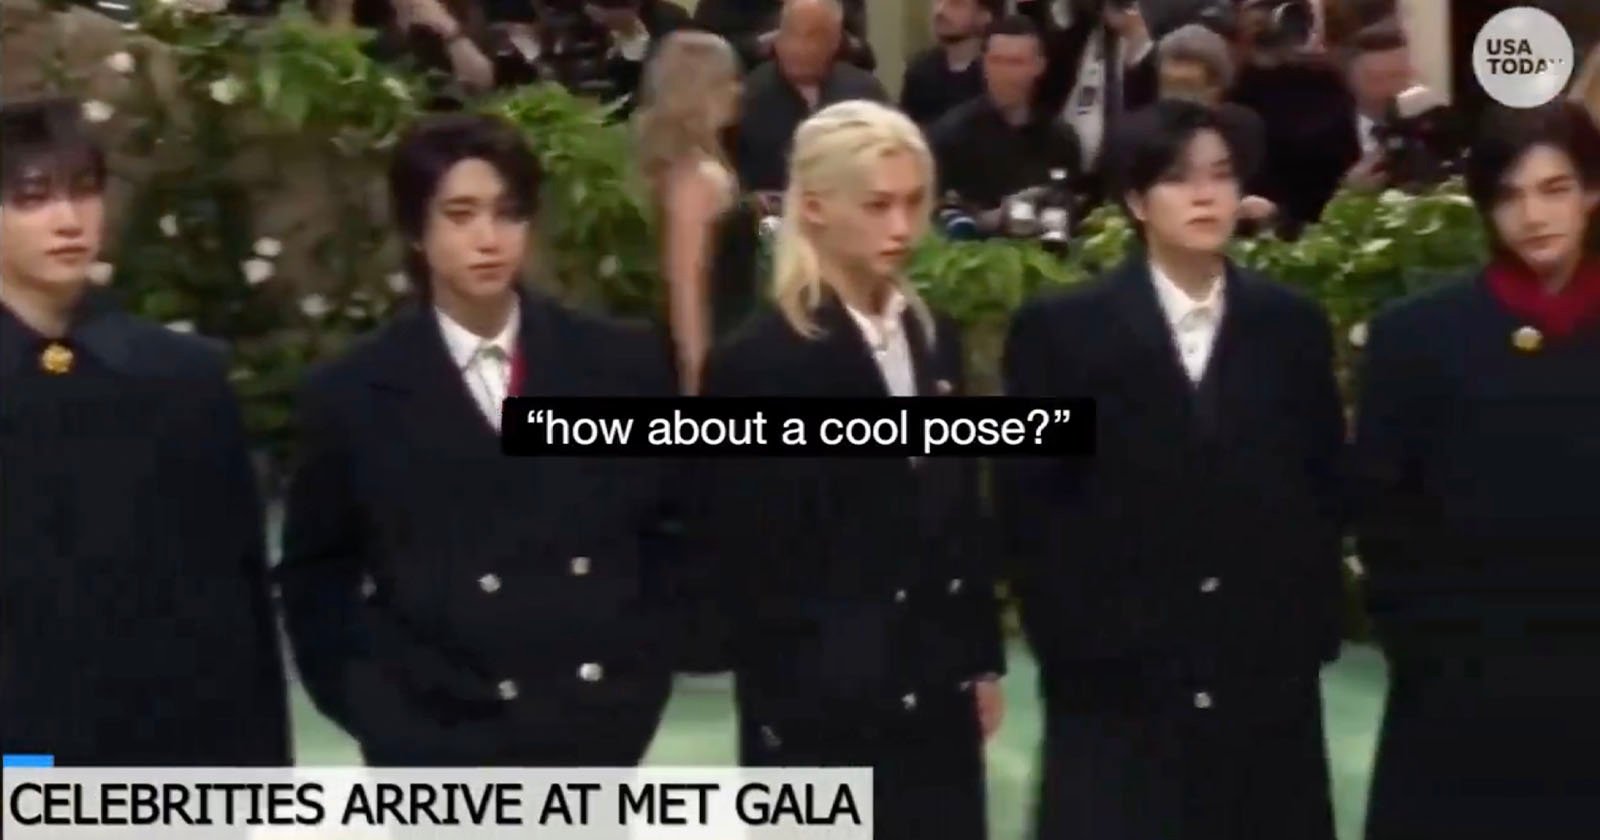 Met Gala Photographers Criticized for ‘Racist’ Comments About K-Pop Band